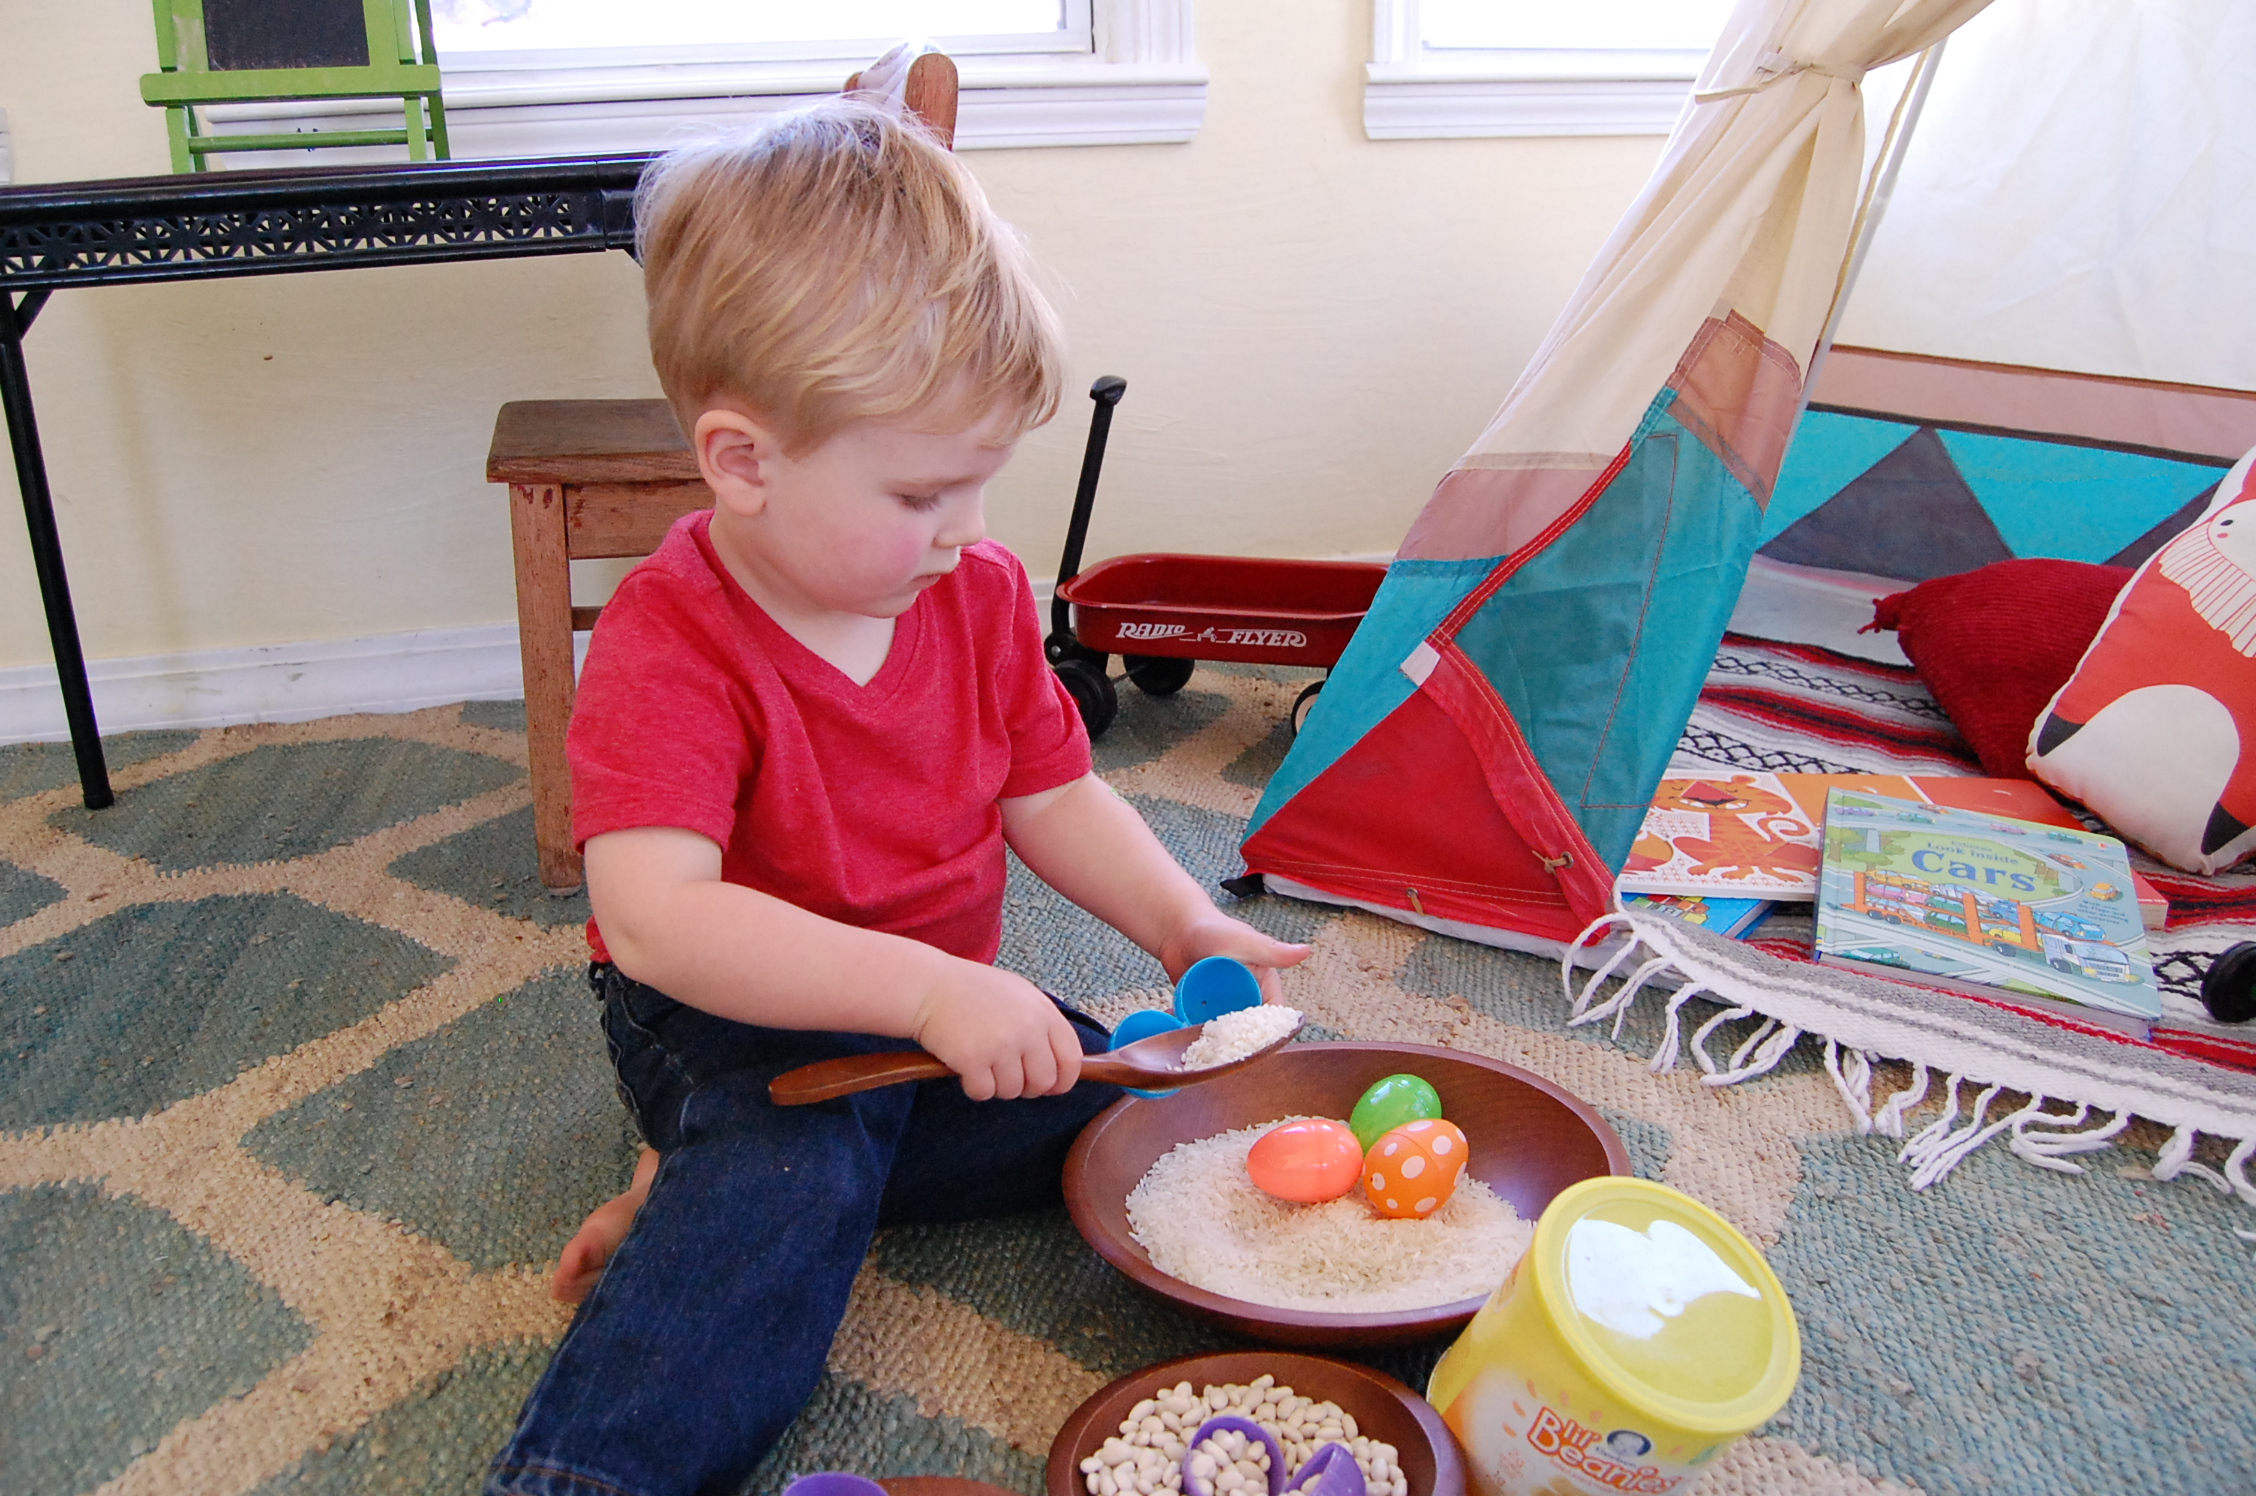 Fill empty Easter Eggs with rice, beans or both for a fun toddler sensory play activity! #toddleractivity #sensoryplay #gerberlilbeanies #toddlersnacks juliannegray.com